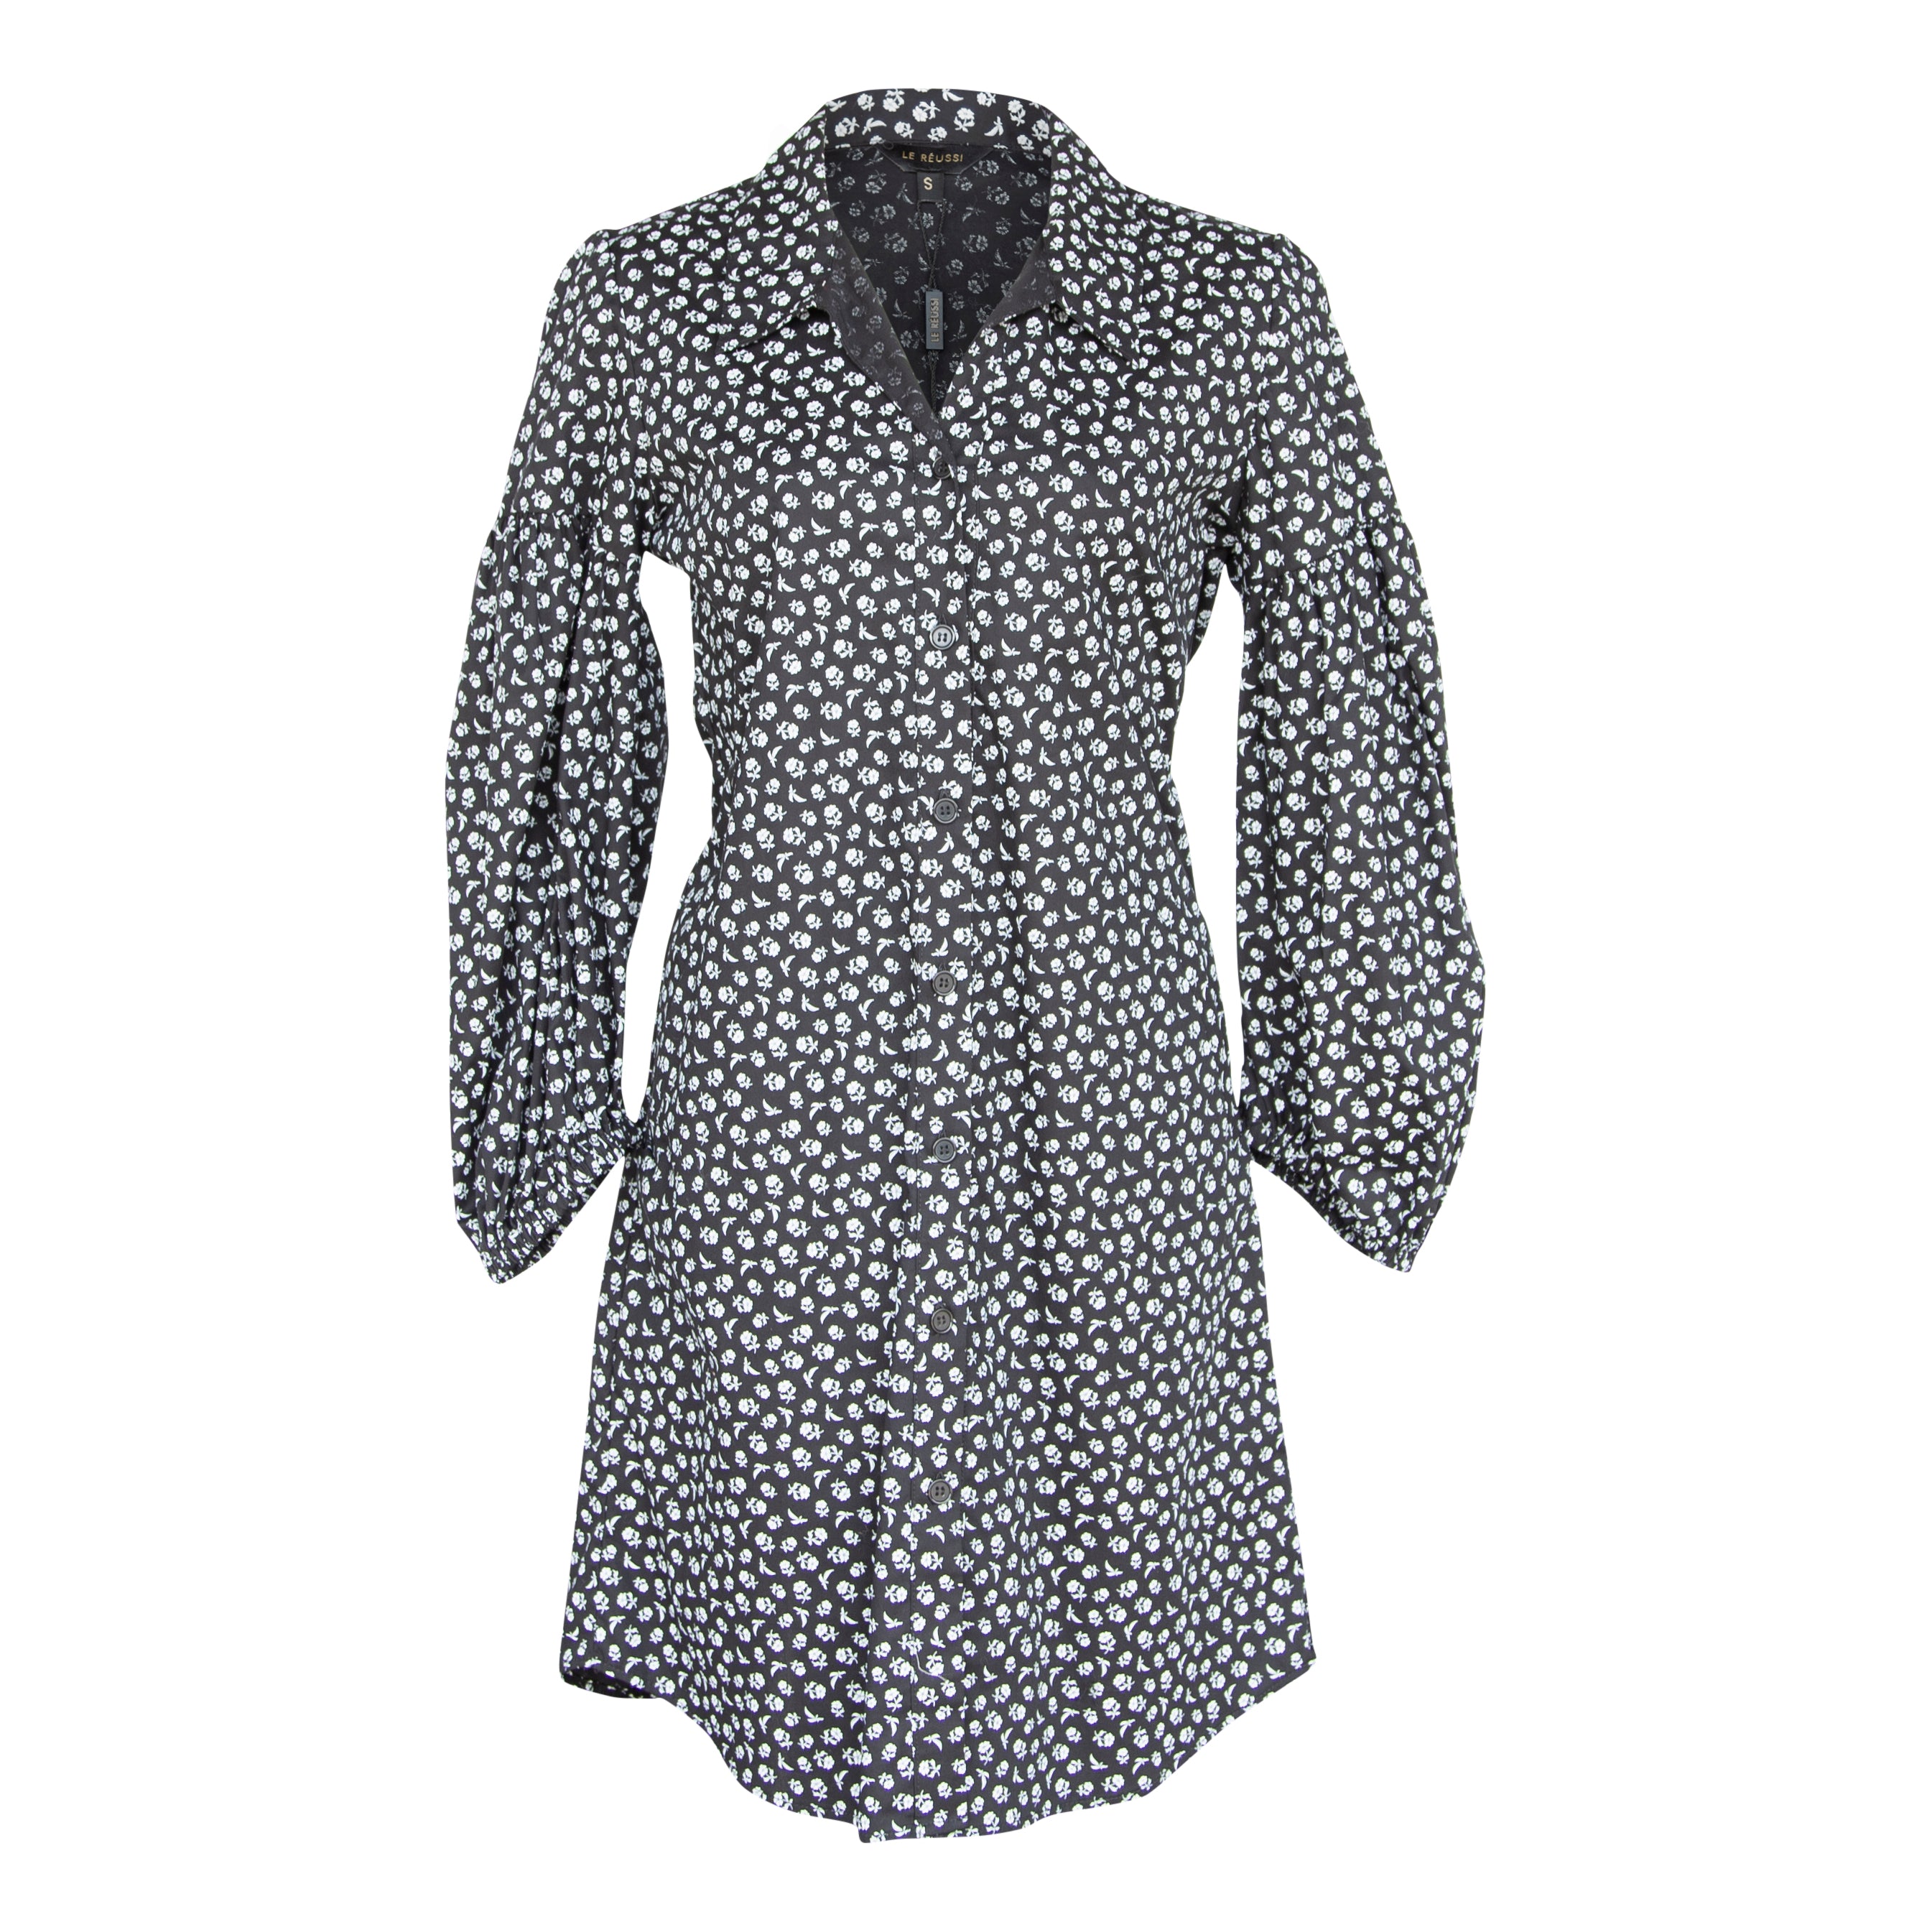 Le Réussi Women's Italian Cotton Shirt Dress With Oversized Sleeves In Black Floral